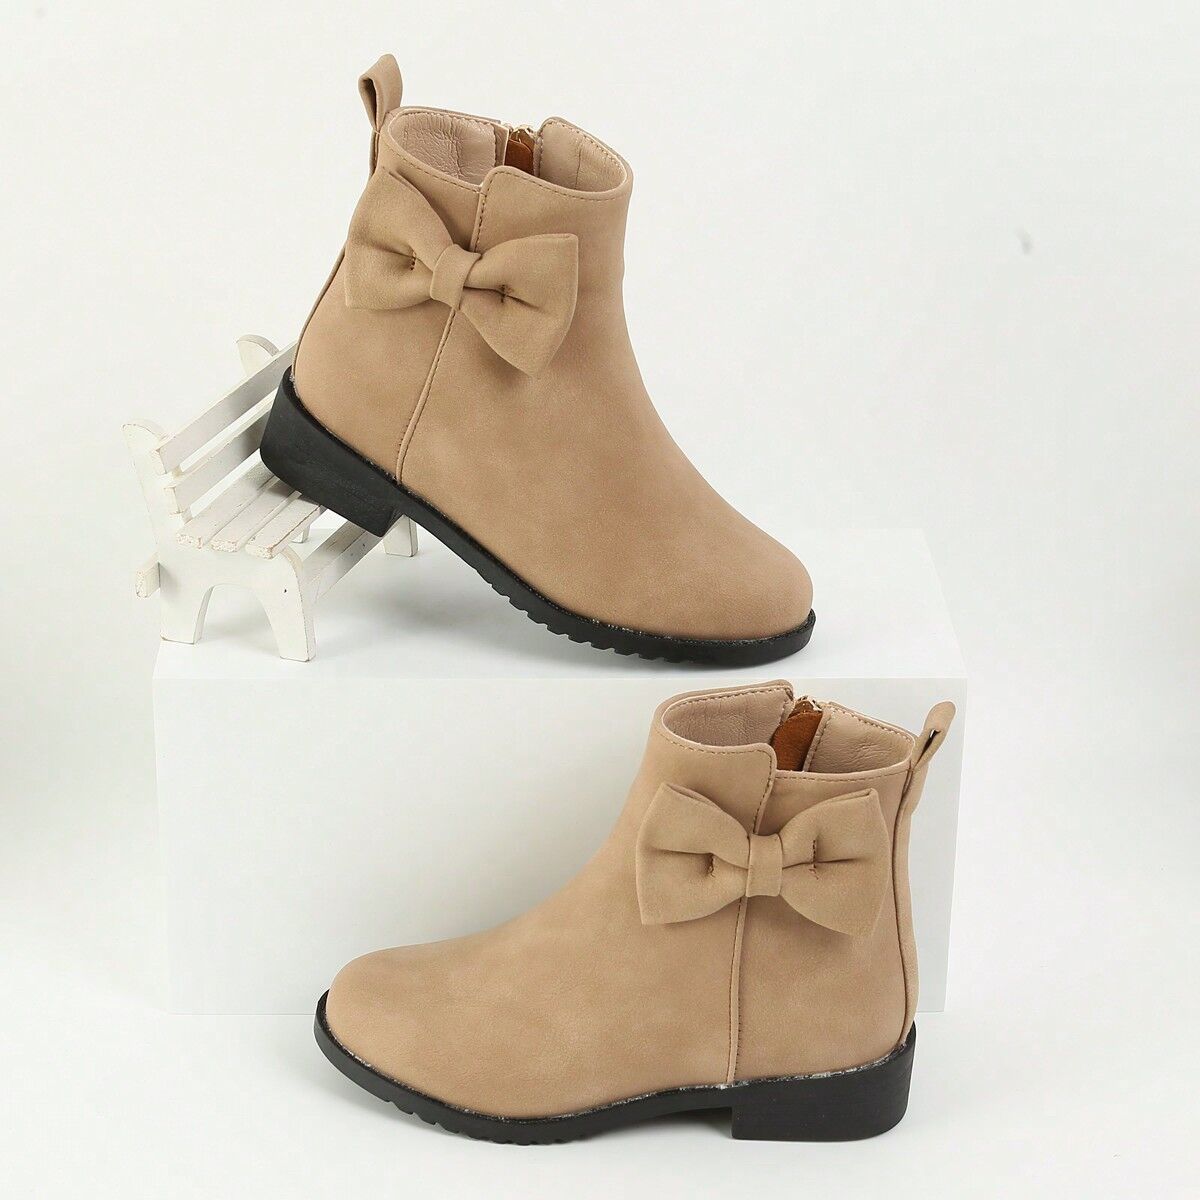 SHEIN Children's Shoes, Girls' Boots, Little Girls' Ankle Booties, Students' Round Toe Flat Boots For Girls Beige CN34,CN35,CN36,CN26,CN27,CN28,CN29,CN30,CN31,CN32,CN33